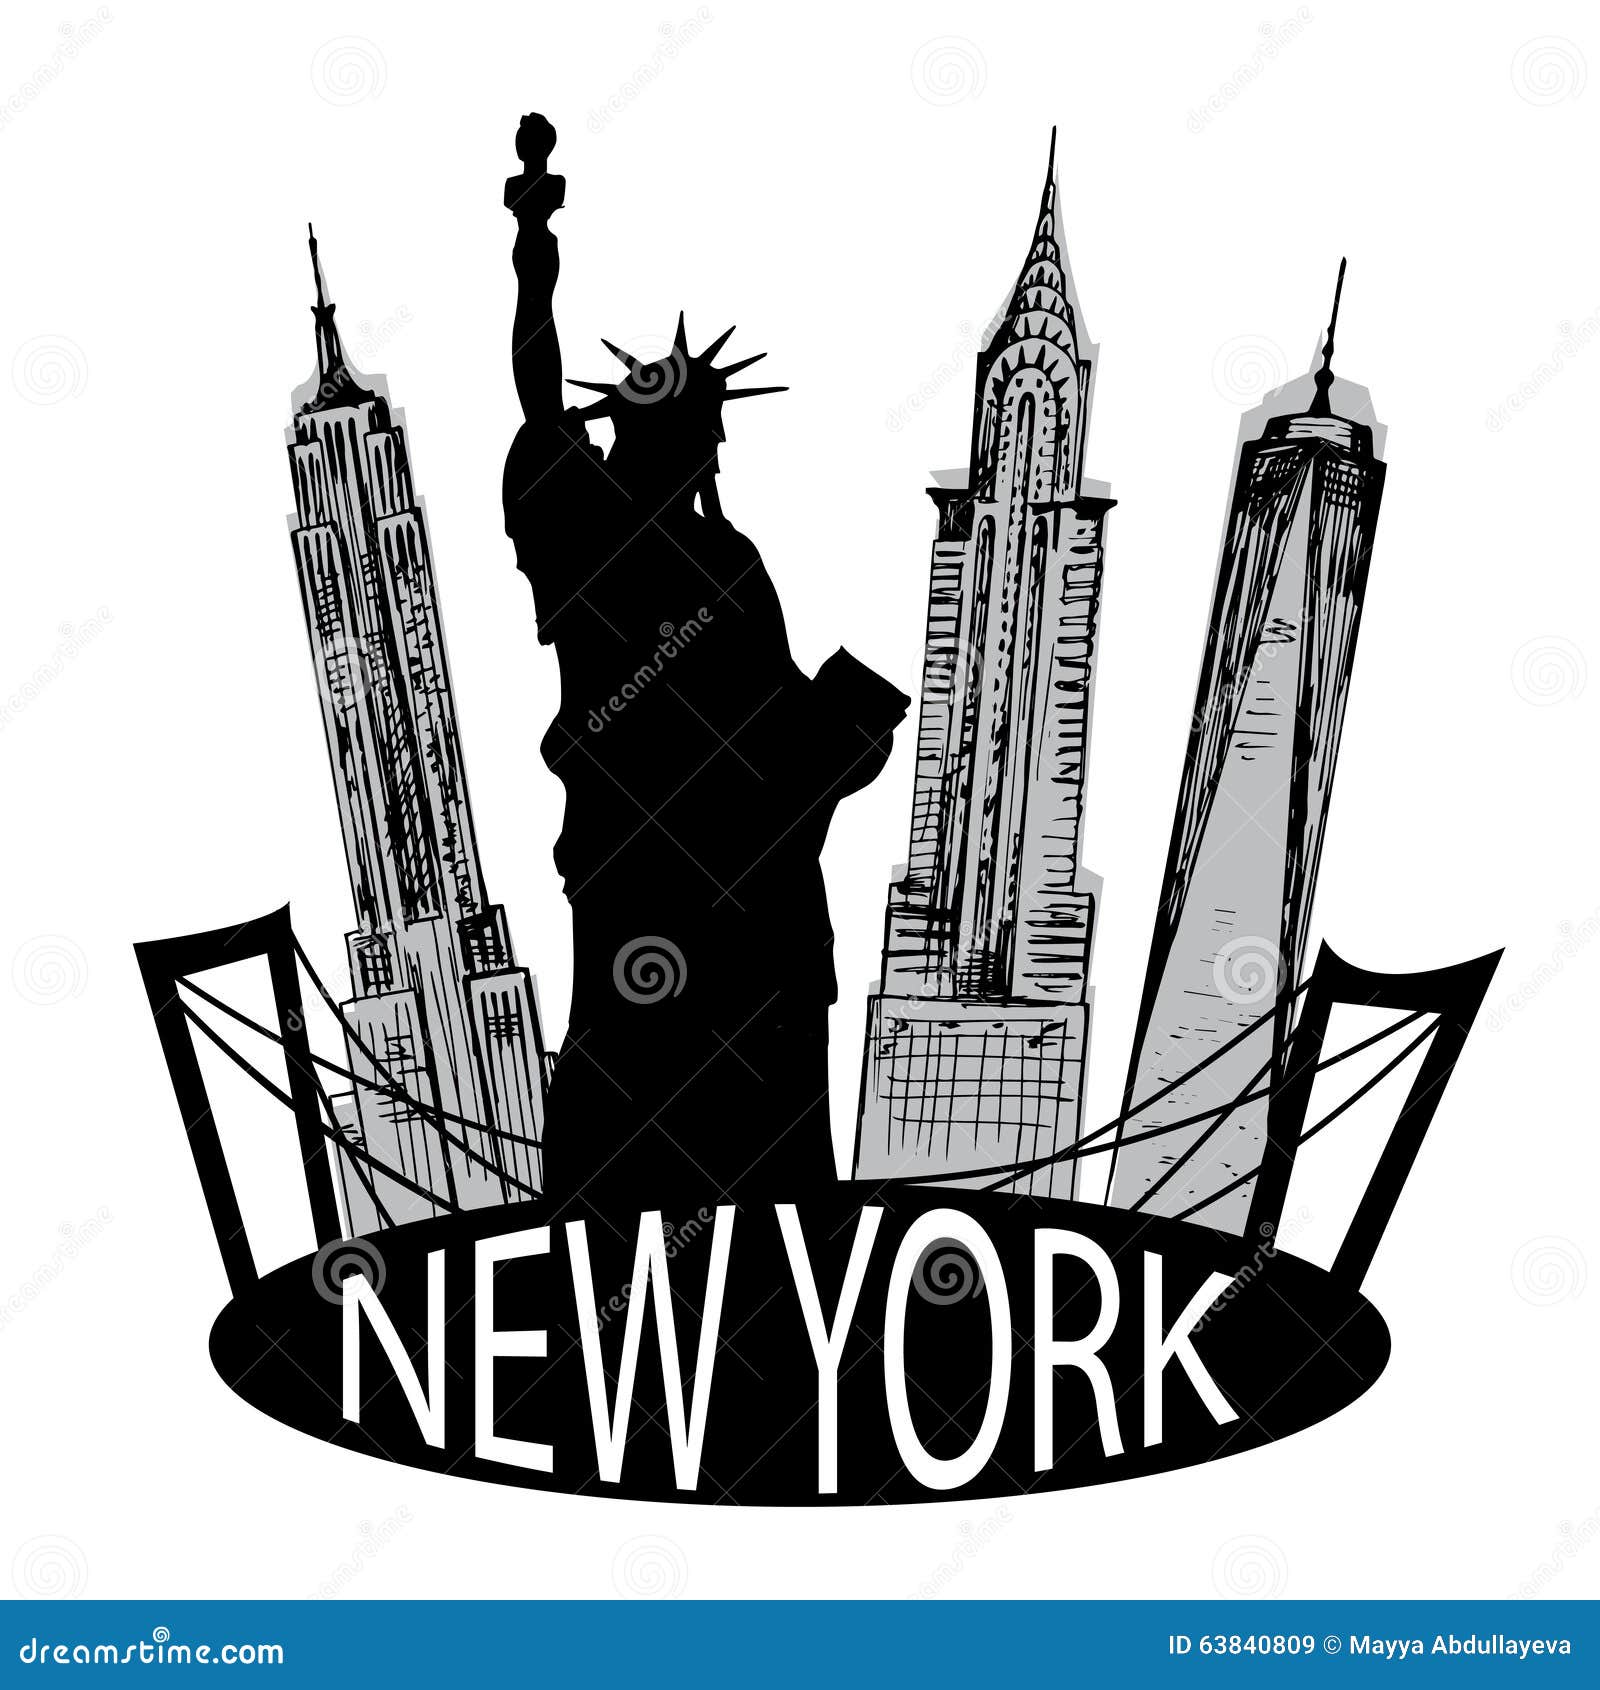 clip art of new york state - photo #50